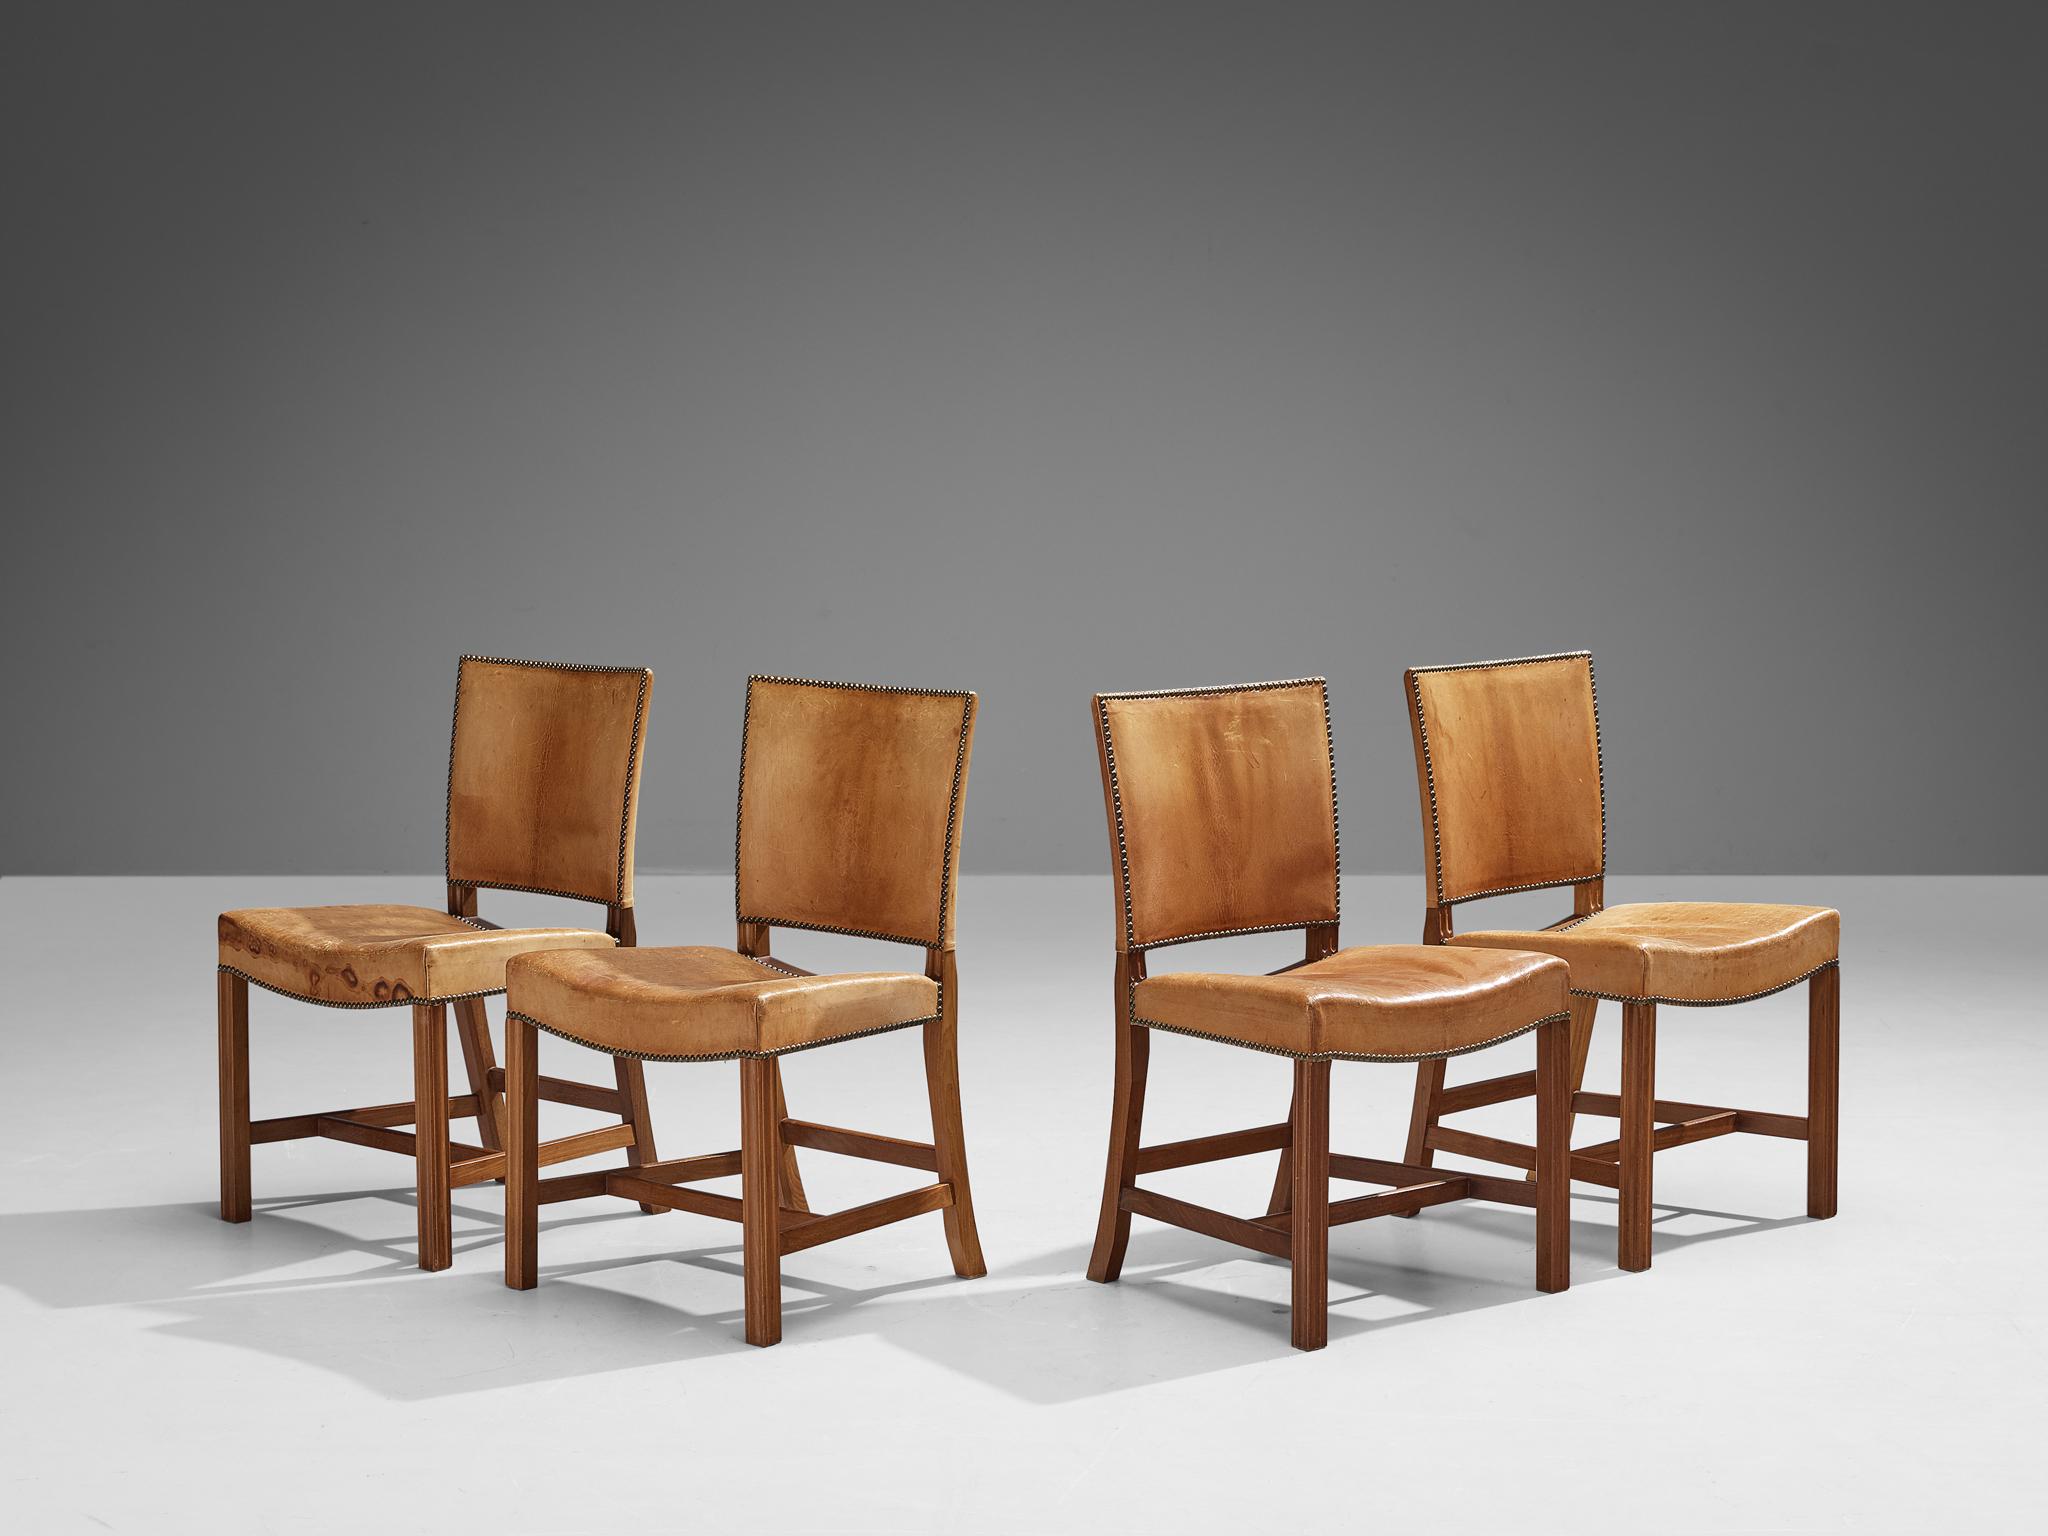 Kaare Klint for Rud Rasmussen, set of four dining chairs, 'The Red Chair', model 4751, original patinated leather, mahogany, brass, Denmark, designed 1933, manufactured 1930s.

These dining chairs in camel leather upholstery are designed in 1933 and